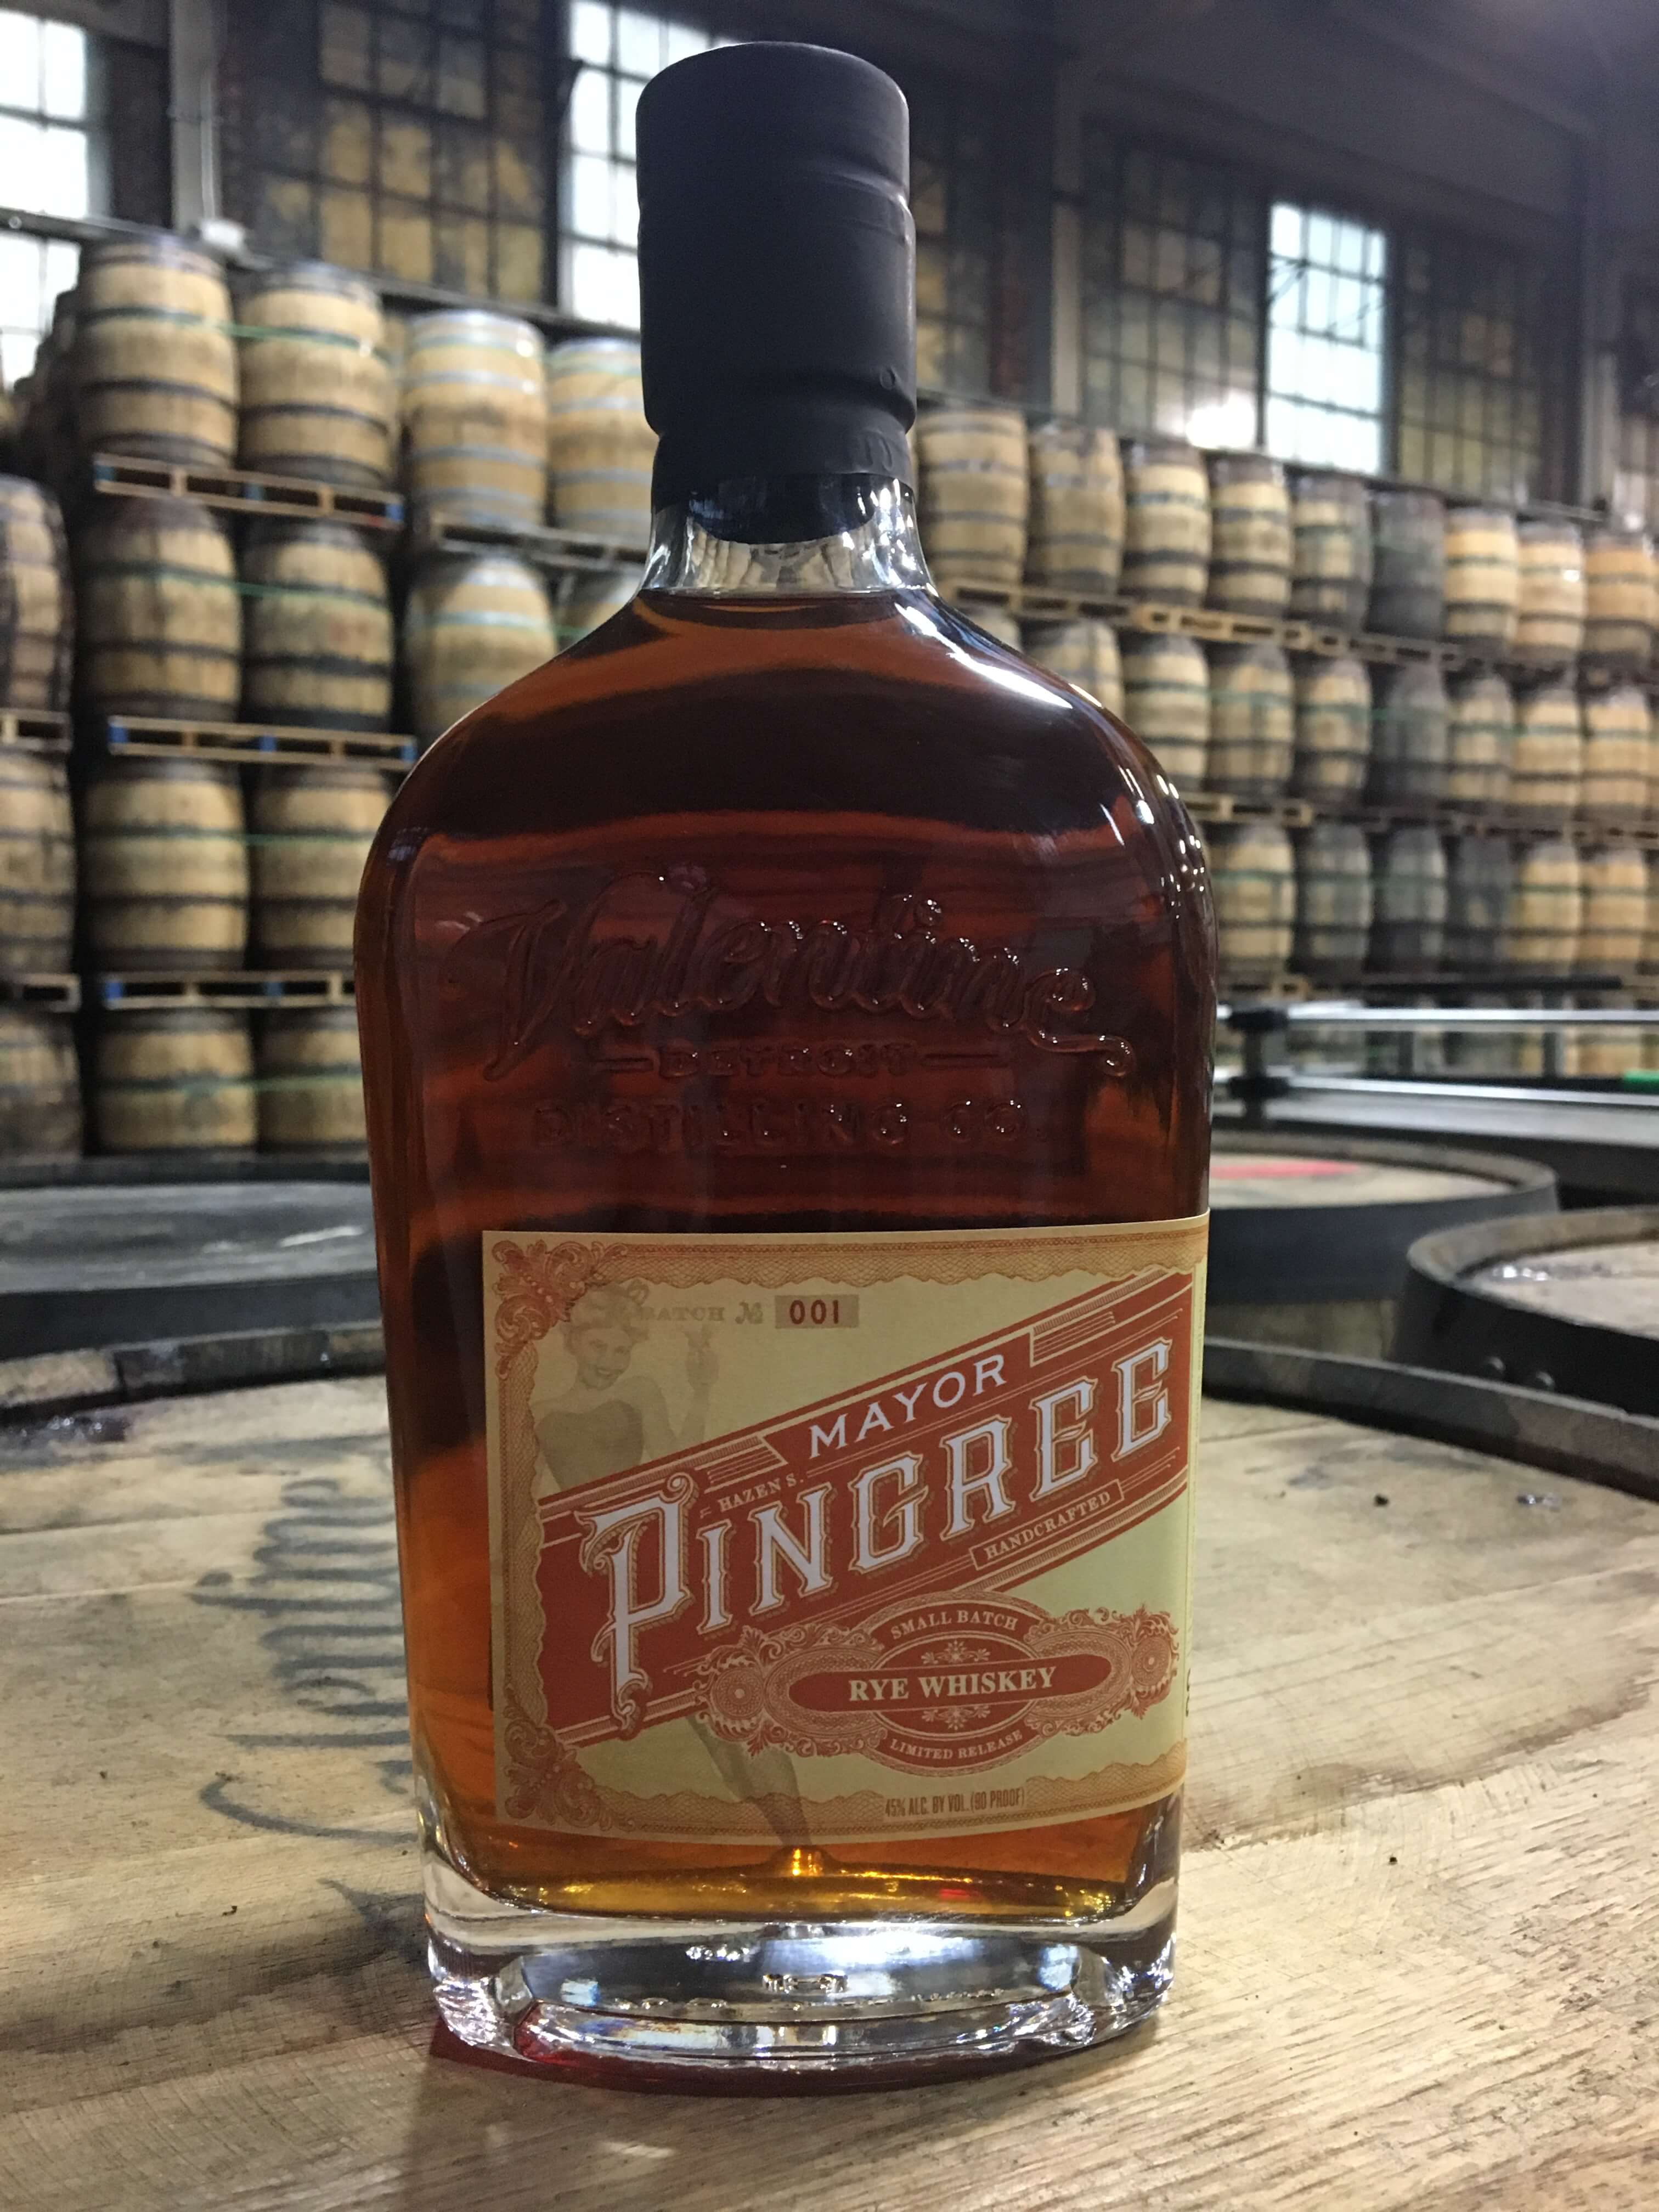 Valentine Distilling Co. begins stocking shelves with Mayor Pingree Rye Whiskey - What's Shakin' week of July 10